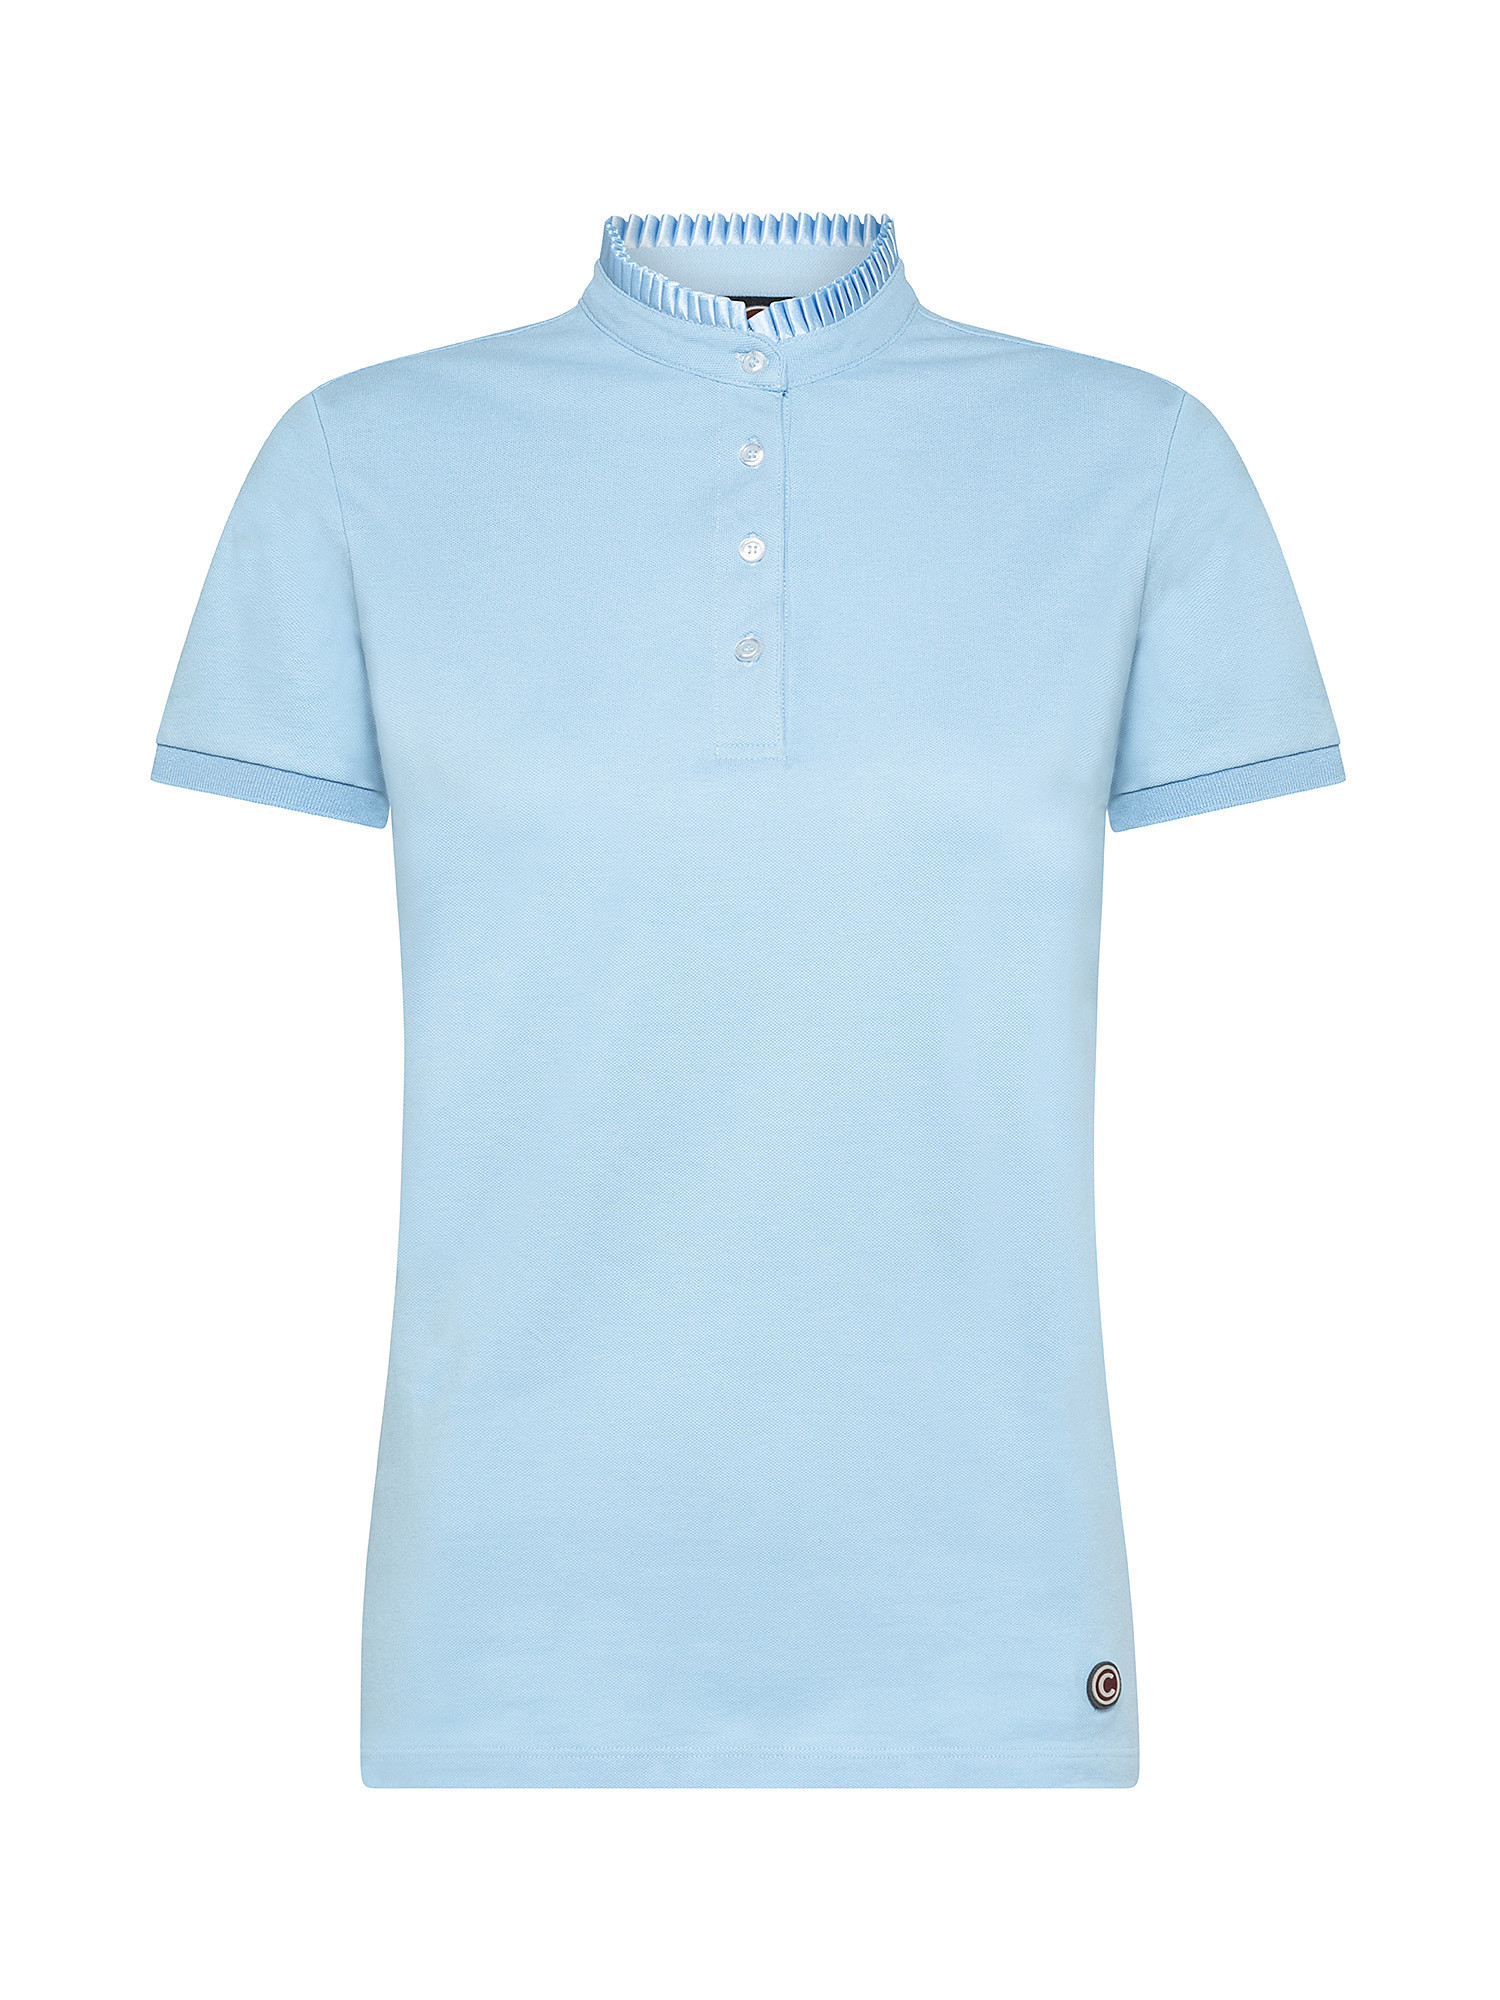 Polo with short sleeves, Light Blue, large image number 0